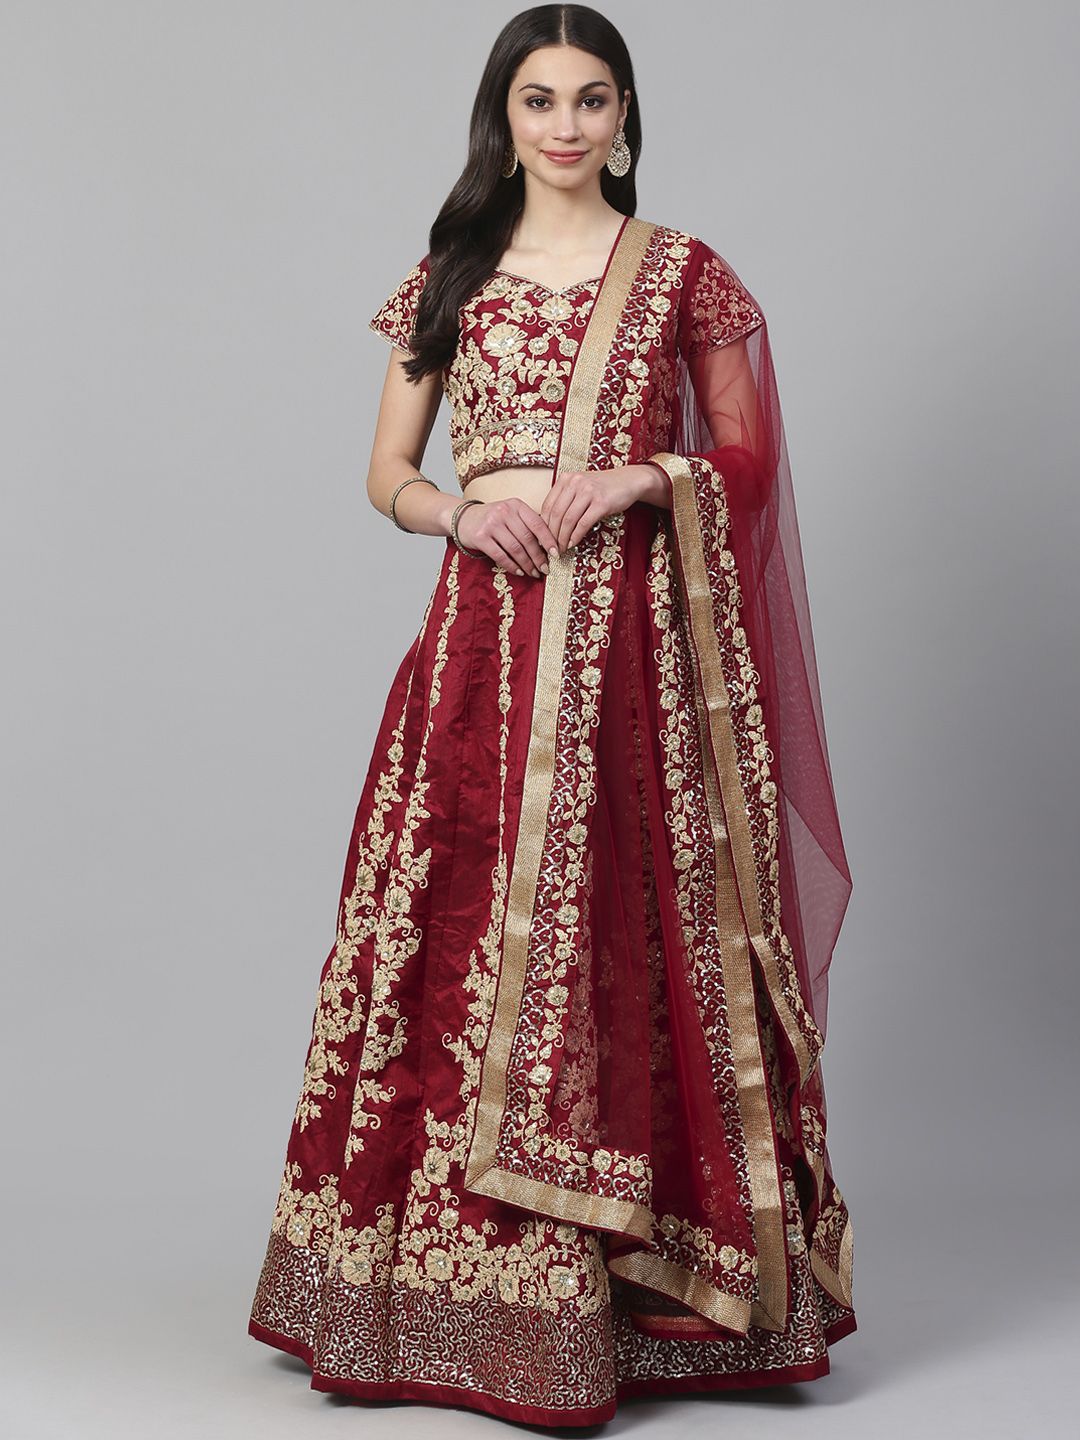 Readiprint Fashions Maroon & Golden Semi-Stitched Lehenga & Unstitched Blouse with Dupatta Price in India